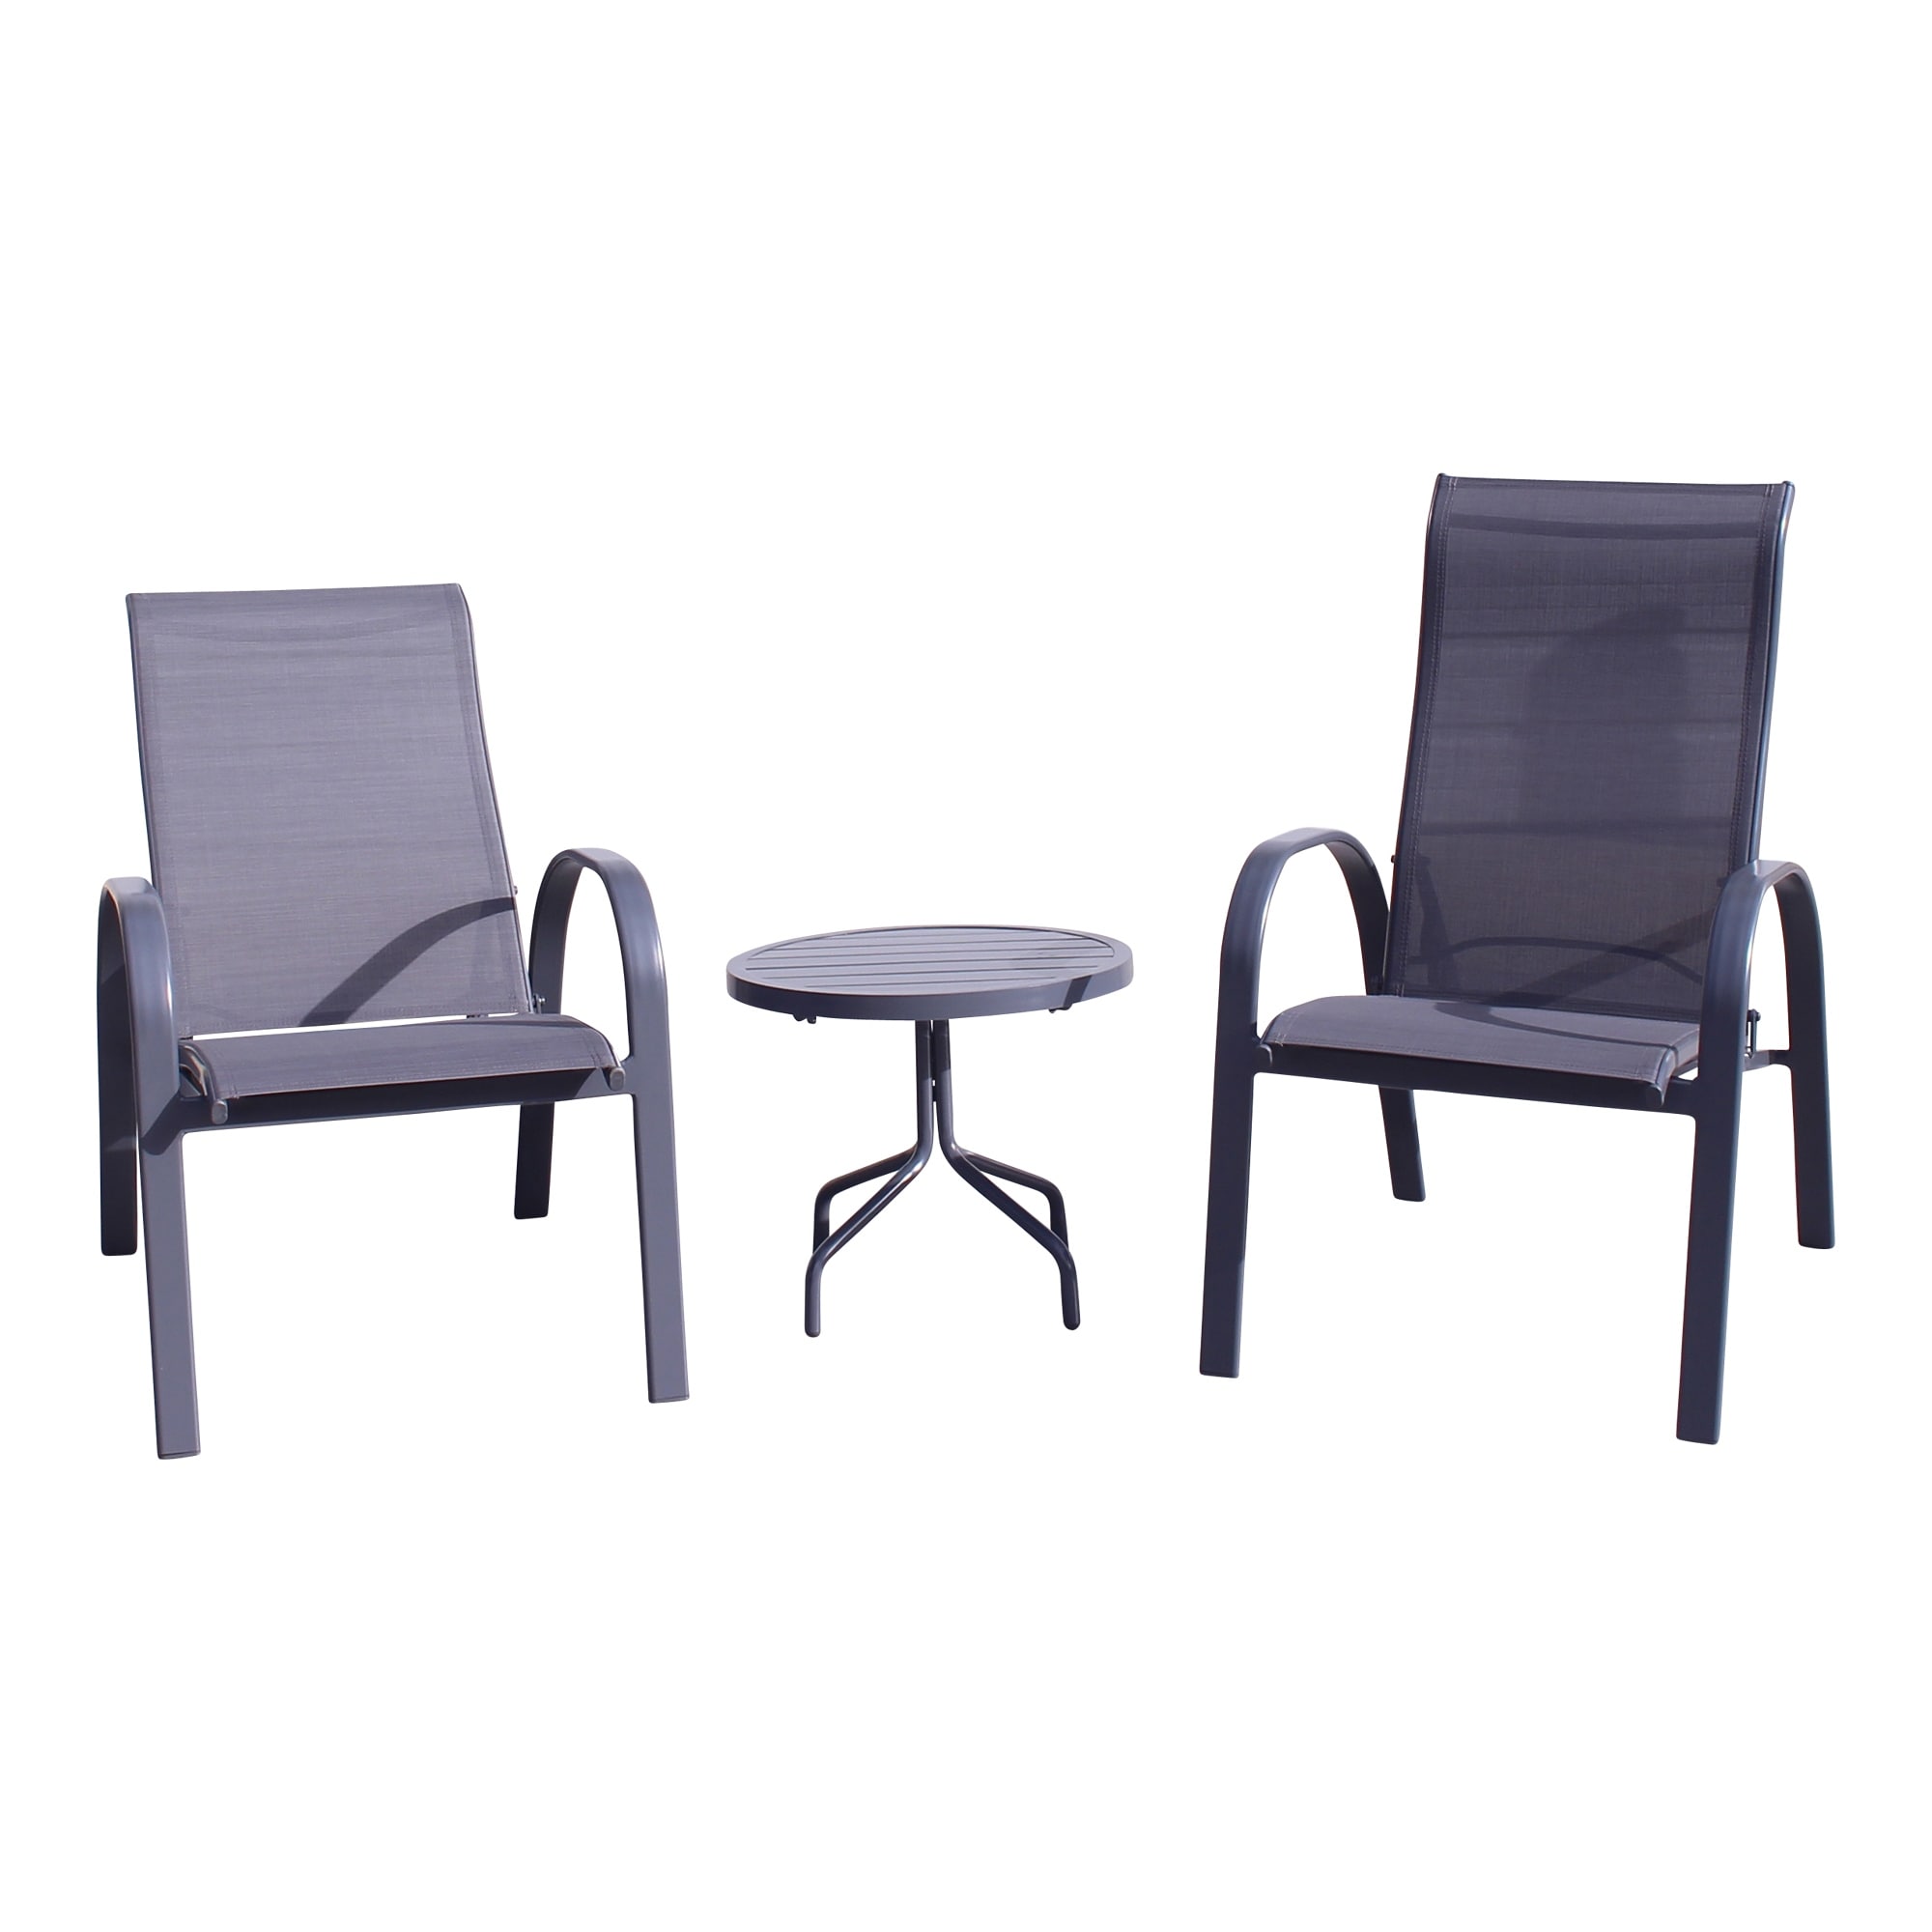 Courtyard Casual Santa Fe 3 Pc Reclining Set Includes One 20 End Table And Two Reclining Sling Chairs